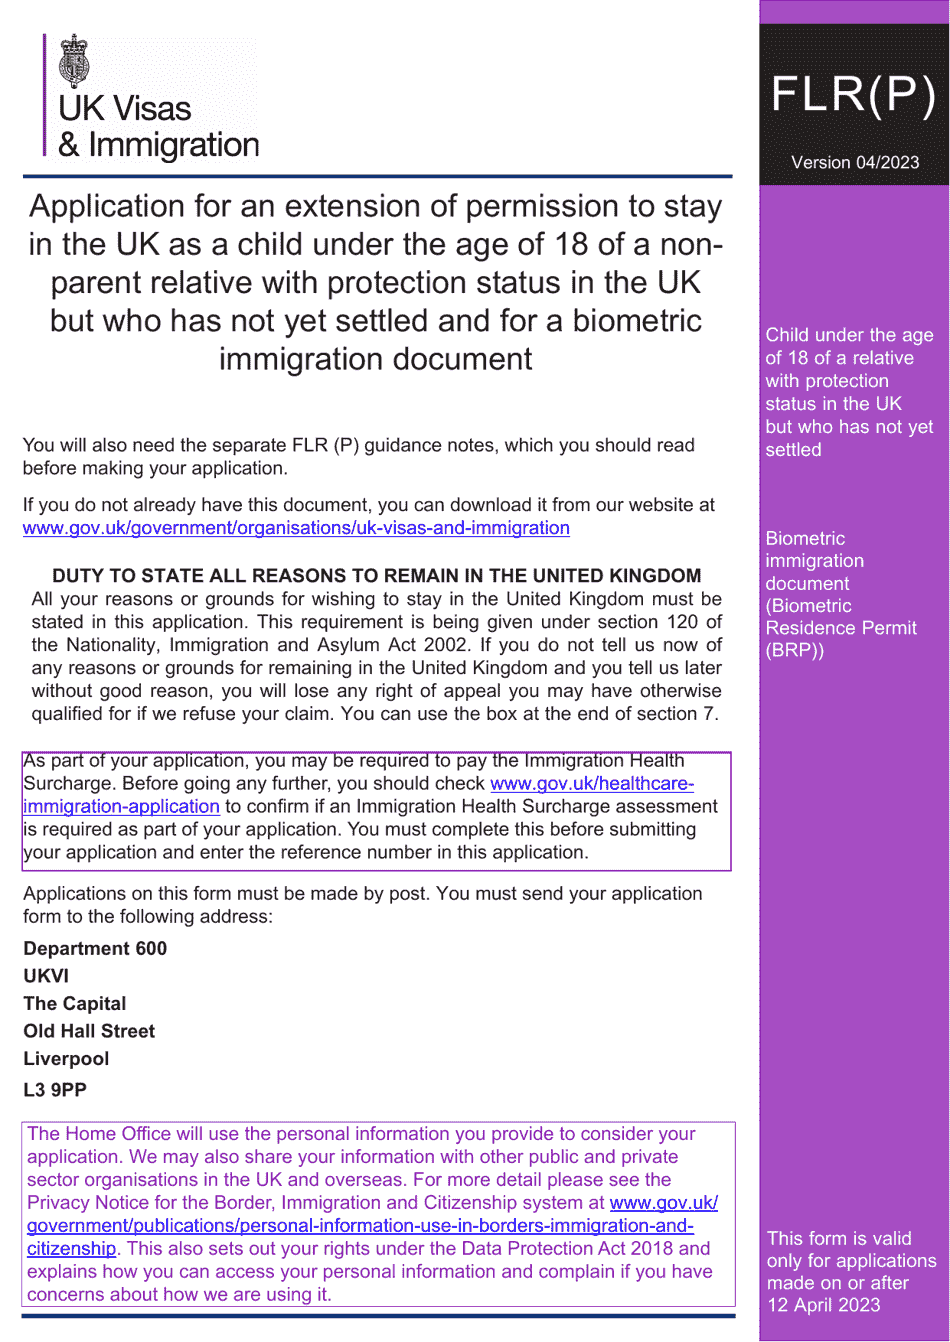 Form FLR(P) Application for an Extension of Permission to Stay in the UK as a Child Under the Age of 18 of a Nonparent Relative With Protection Status in the UK but Who Has Not yet Settled and for a Biometric Immigration Document - United Kingdom, Page 1